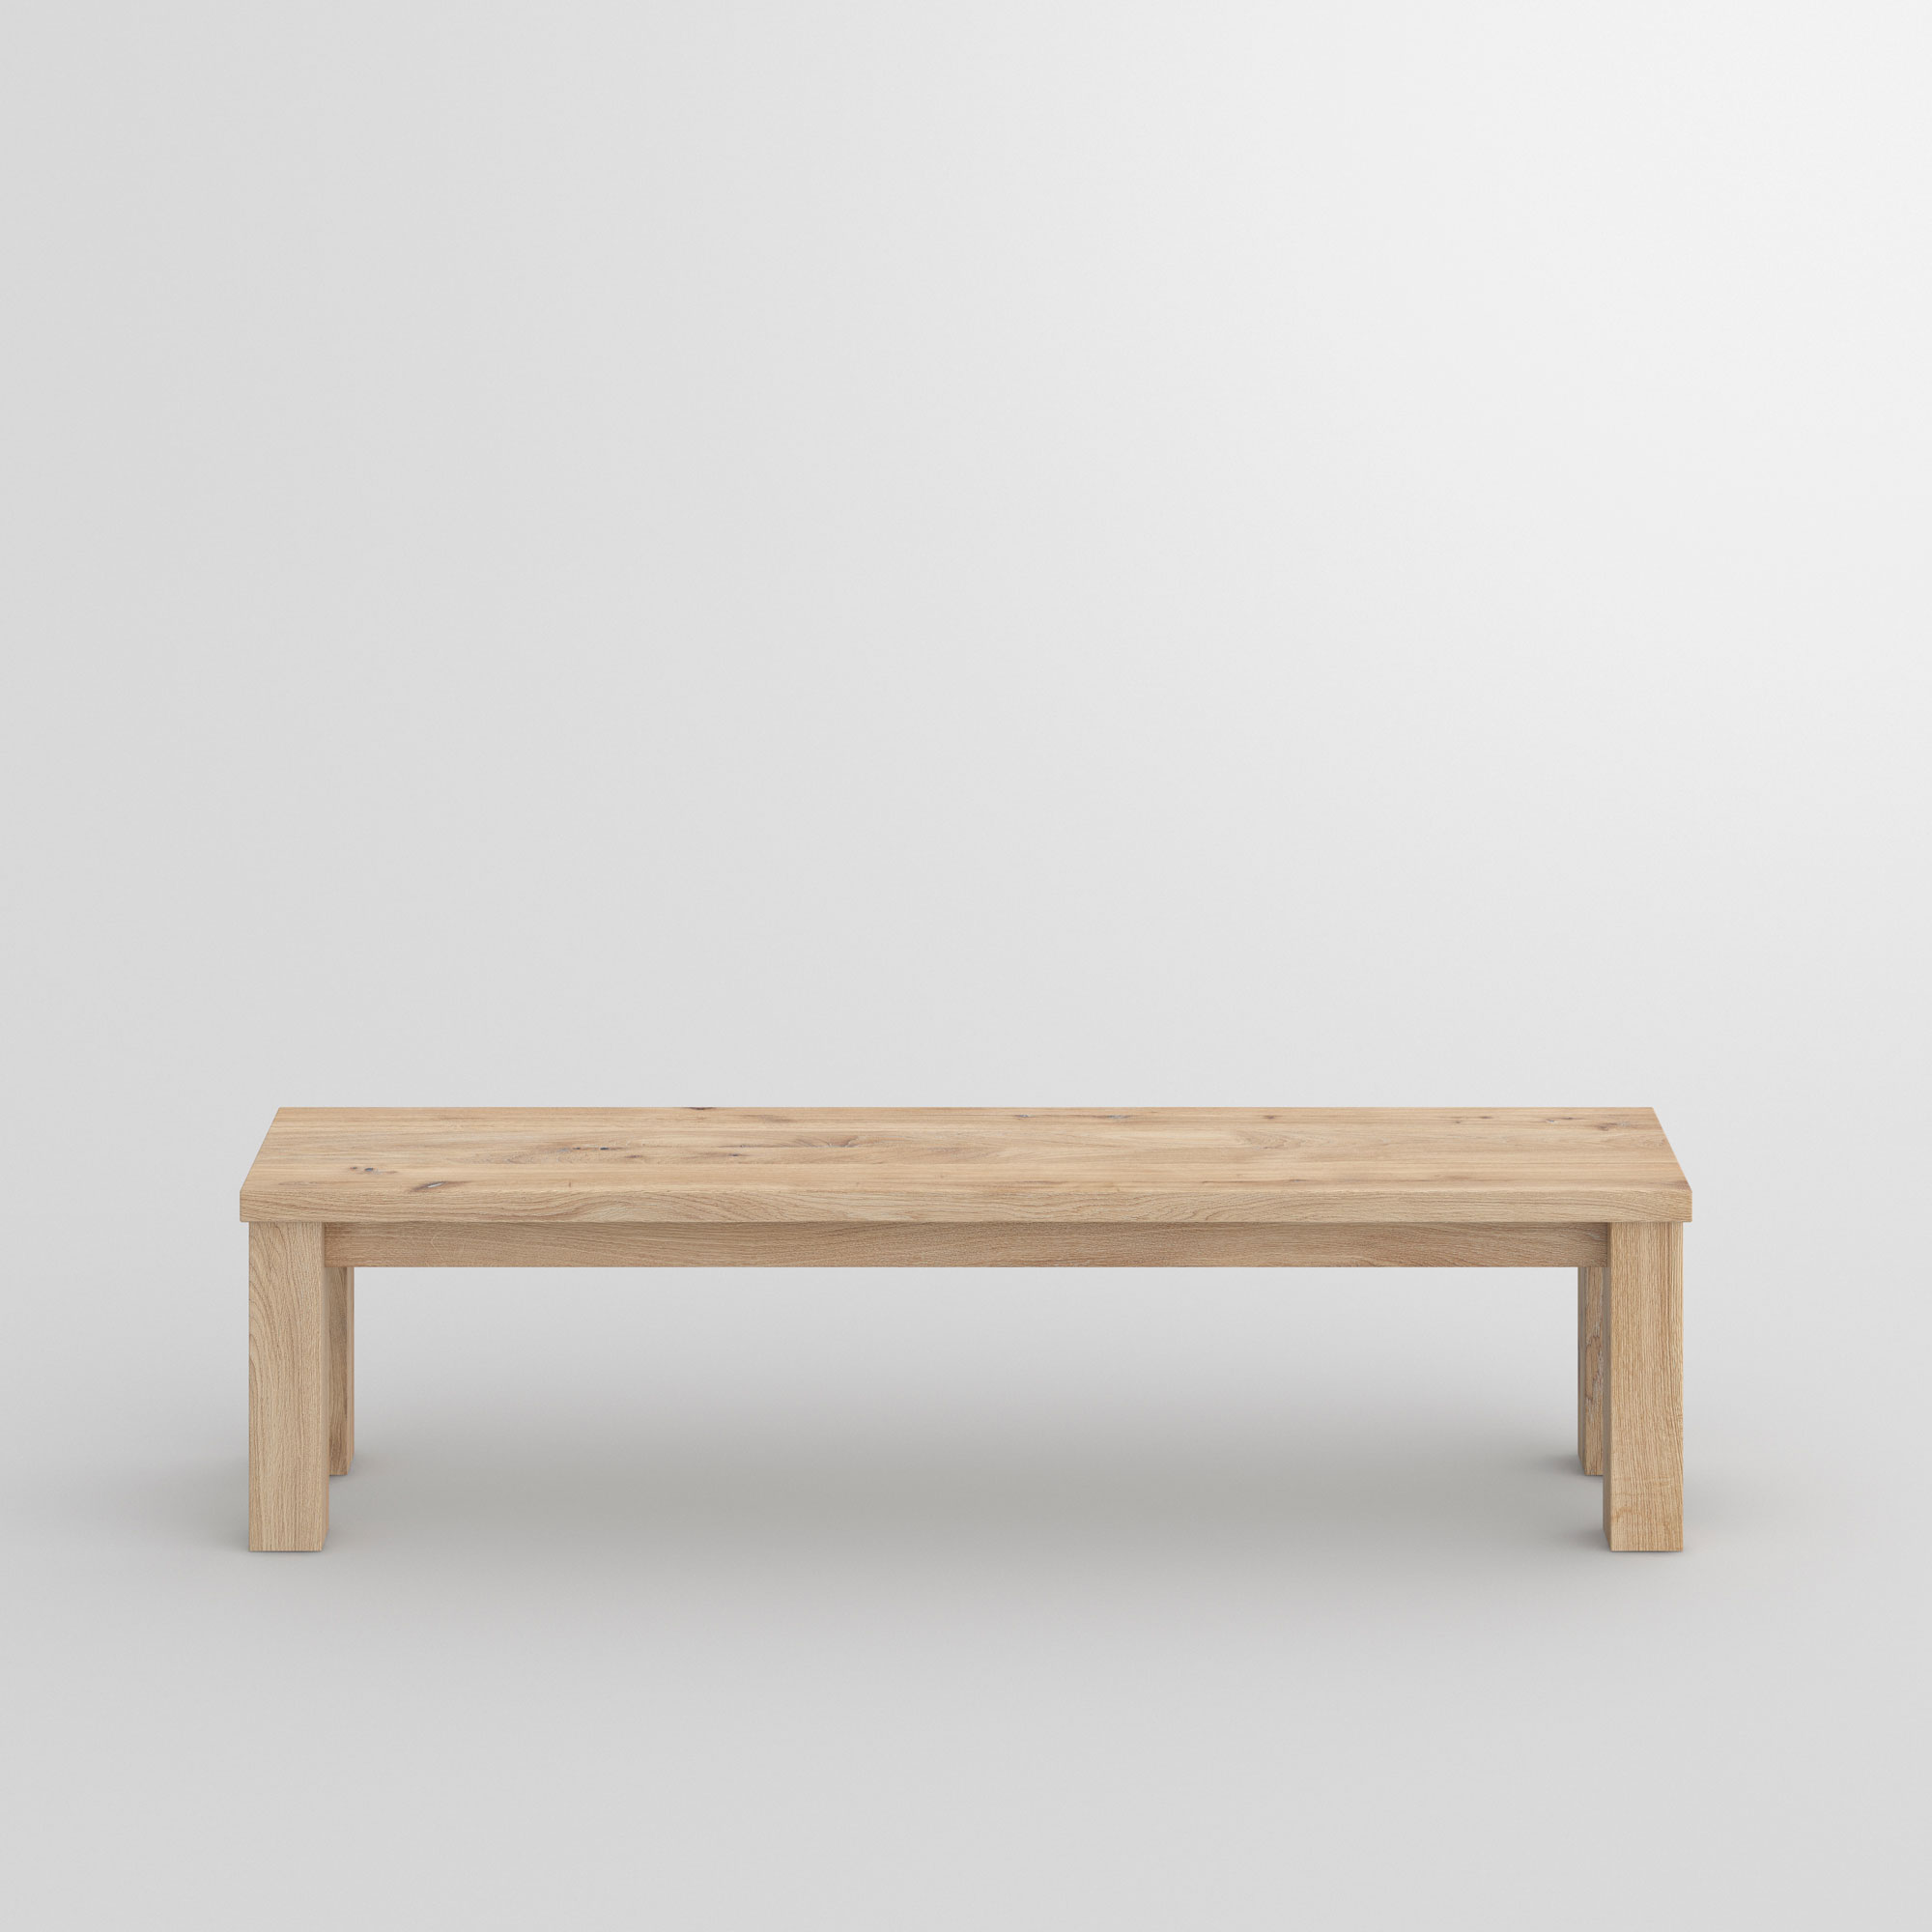 Tailor-Made Wood Bench FORTE 4 cam2 custom made in solid wood by vitamin design